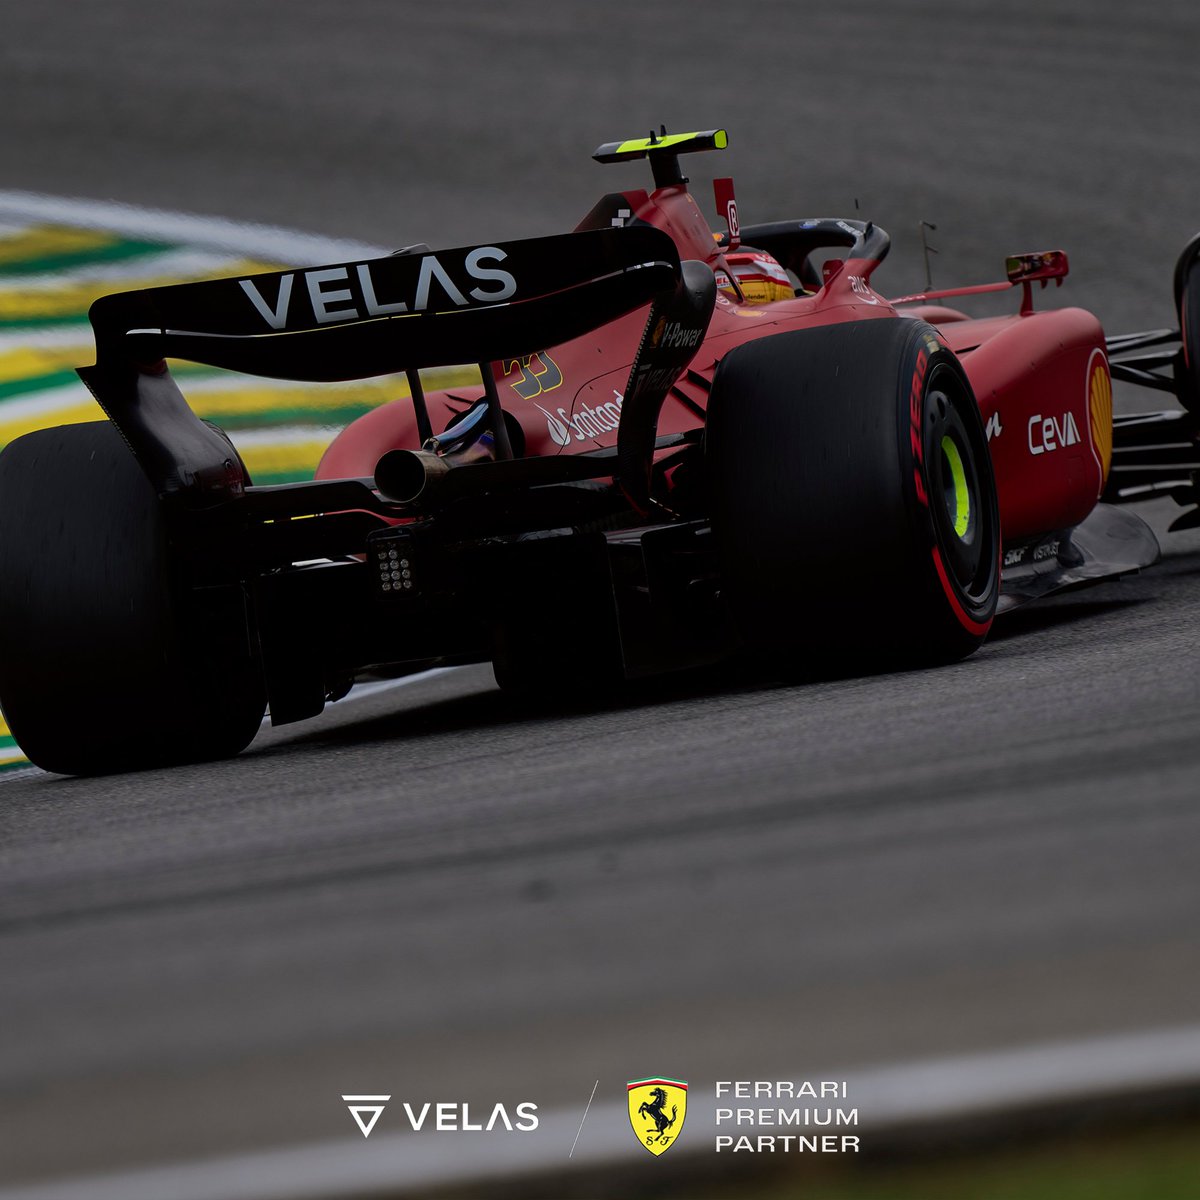 A difficult start to the #BrazilGP for @scuderiaferrari after a rain shower during Quali washed away their hopes of claiming the front row of the grid for tomorrow’s #F1Sprint. Onwards and upwards, all to play for tomorrow! #essereFerrari🔴 #Velas #VLX #FutureDriven